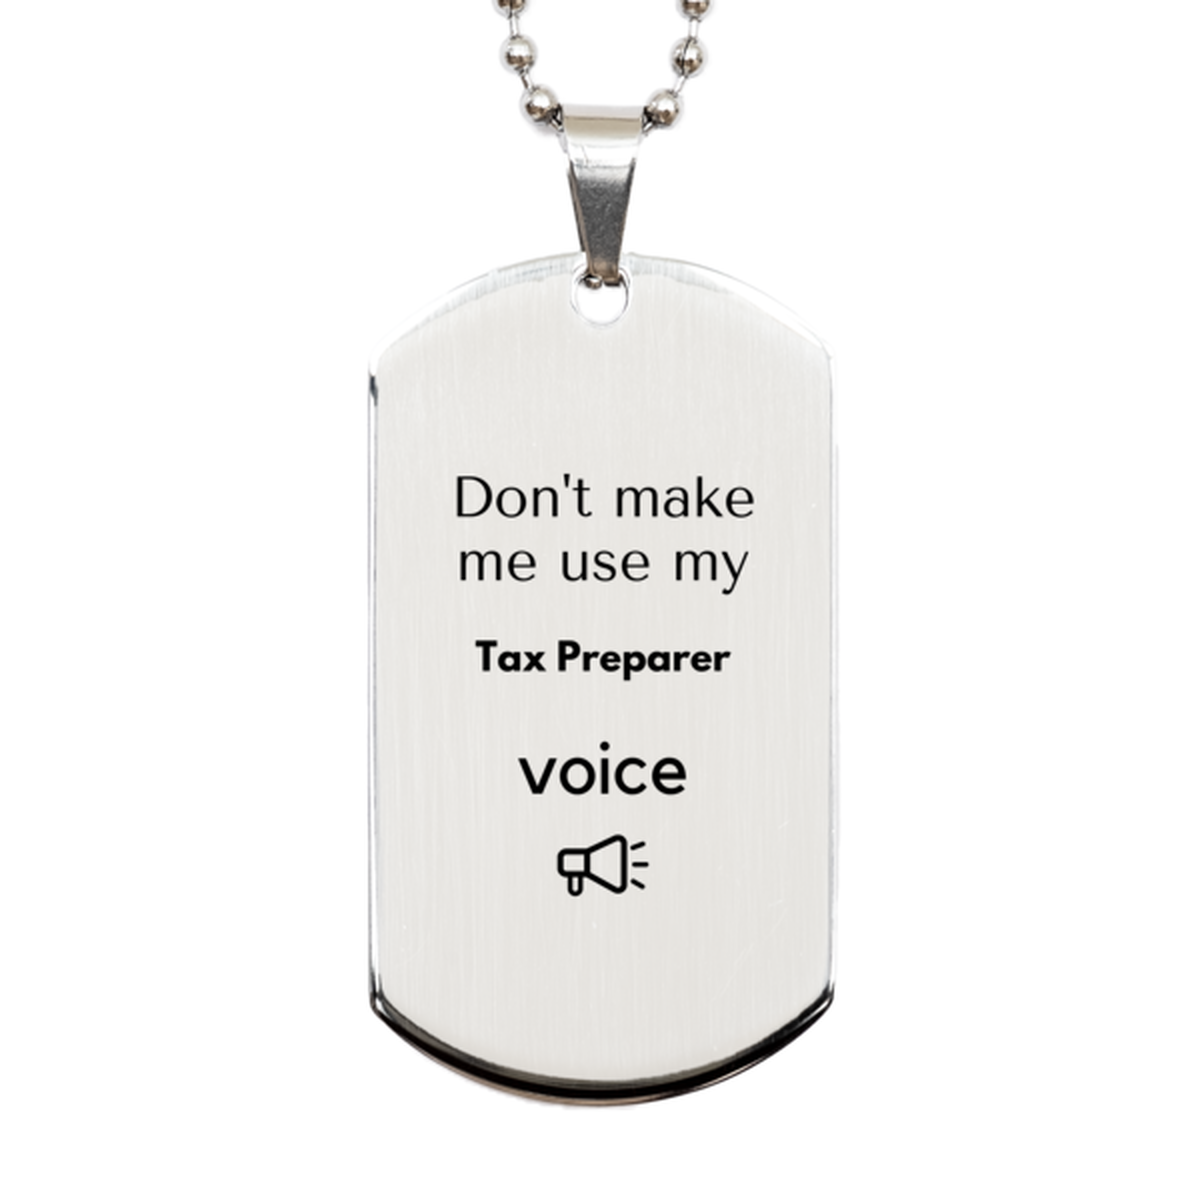 Don't make me use my Tax Preparer voice, Sarcasm Tax Preparer Gifts, Christmas Tax Preparer Silver Dog Tag Birthday Unique Gifts For Tax Preparer Coworkers, Men, Women, Colleague, Friends